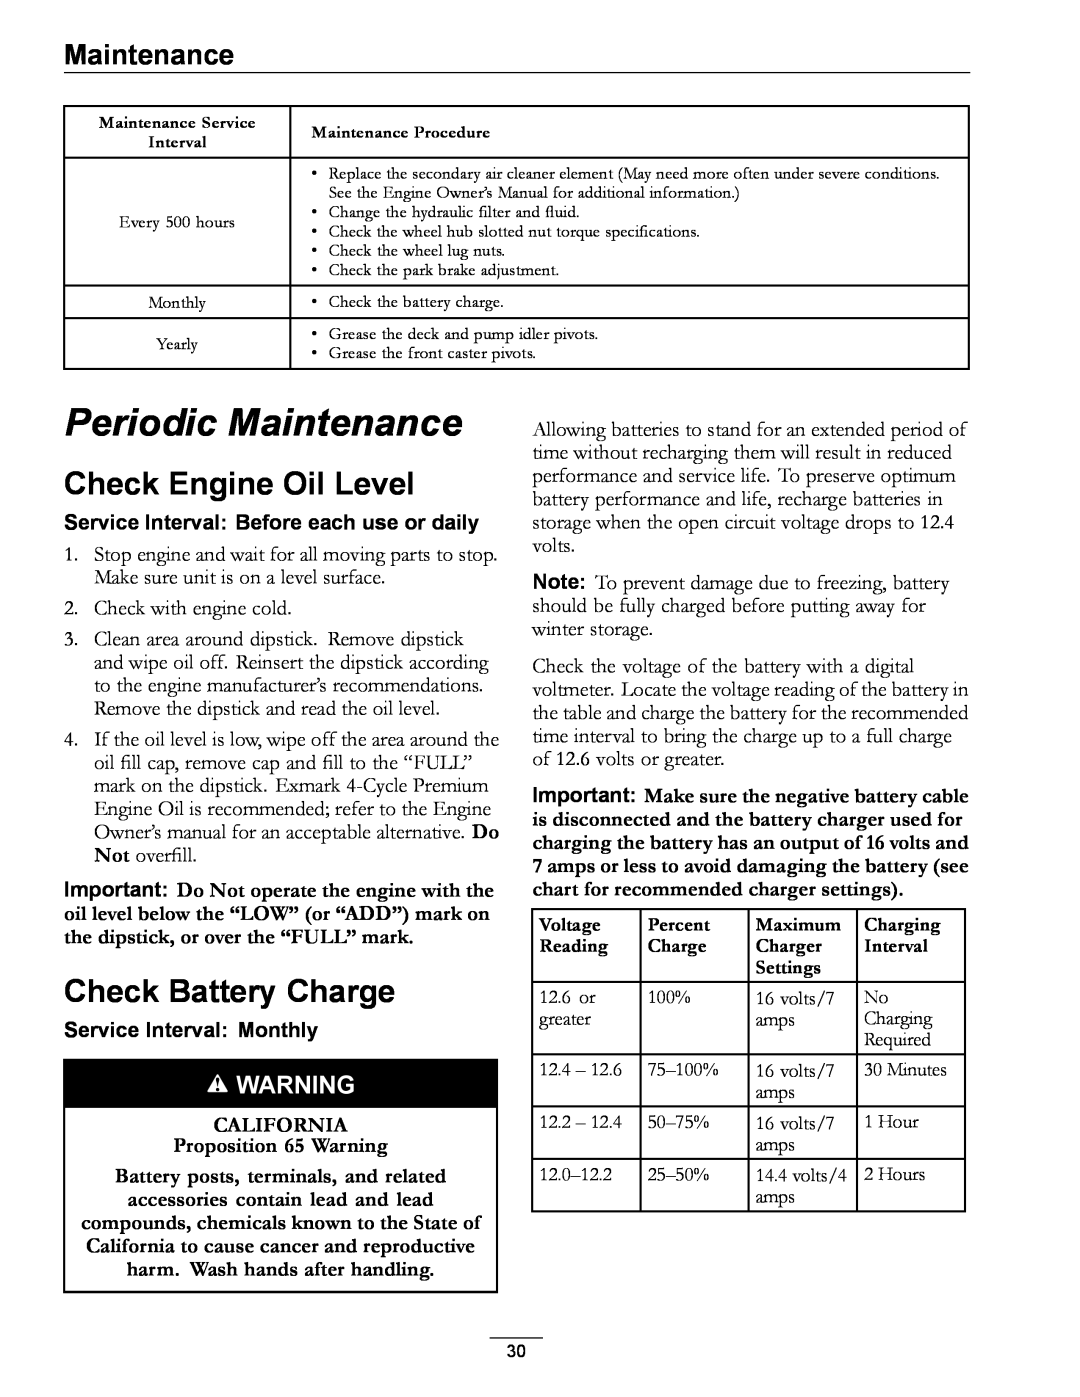 Exmark 4500-872 manual Periodic Maintenance, Check Engine Oil Level, Check Battery Charge, Service Interval Monthly 